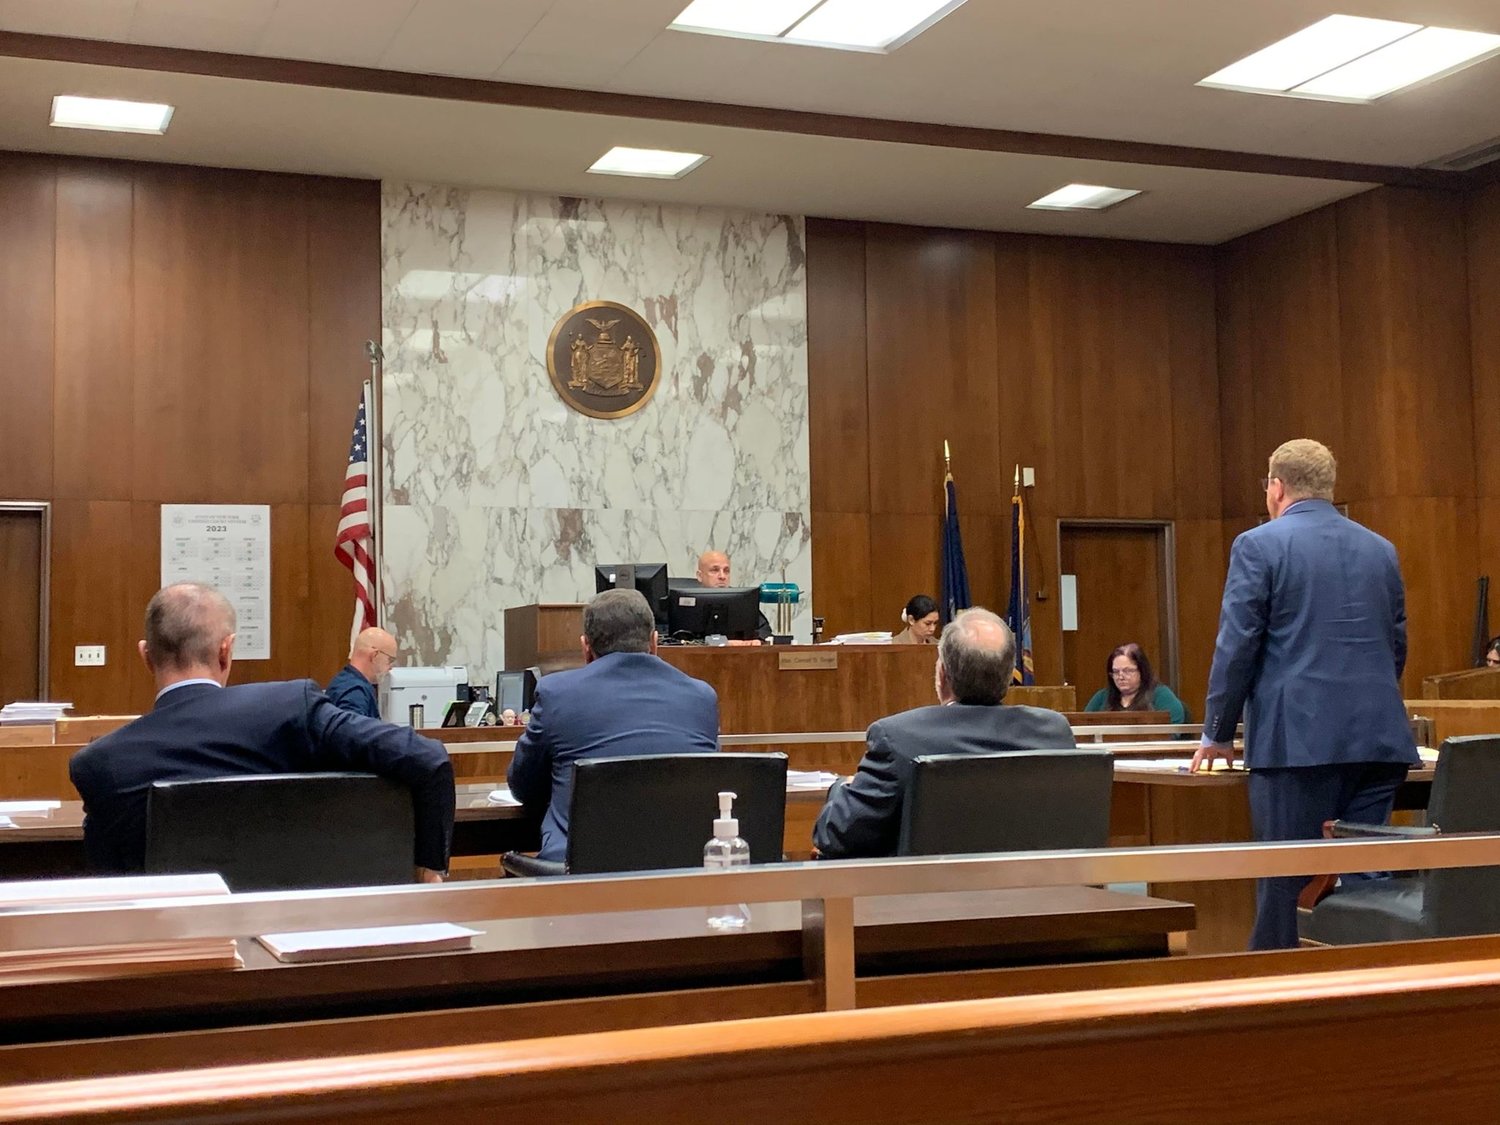 Inside Judge Conrad Singer’s courtroom in Supreme Court in Mineola, Austin Graff, right, argued against four lawyers representing Sanitation commissioners Patrick Doherty and Sheryl Beckman, Town Clerk Kate Murray, Oceanside Sanitation District No. 7, and the Town of Hempstead.